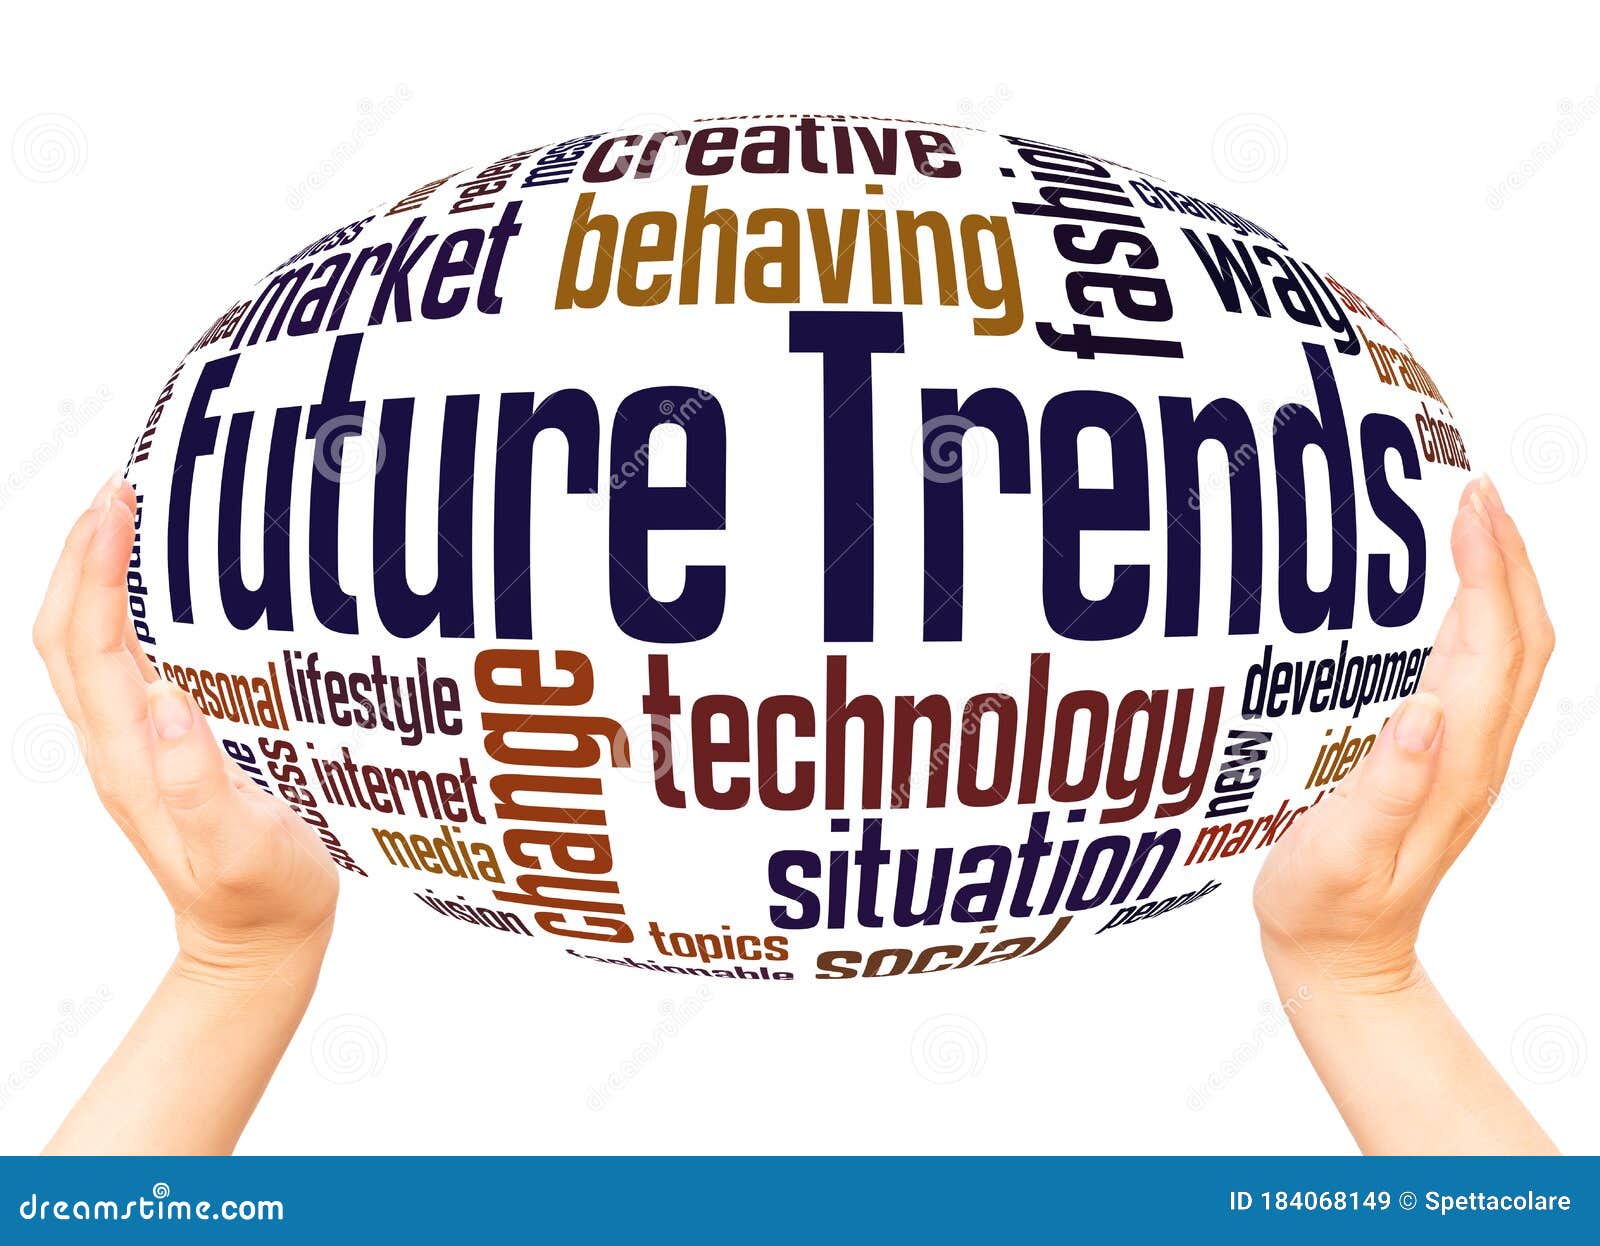 Future Trends Word Hand Sphere Cloud Concept Stock Image Image of